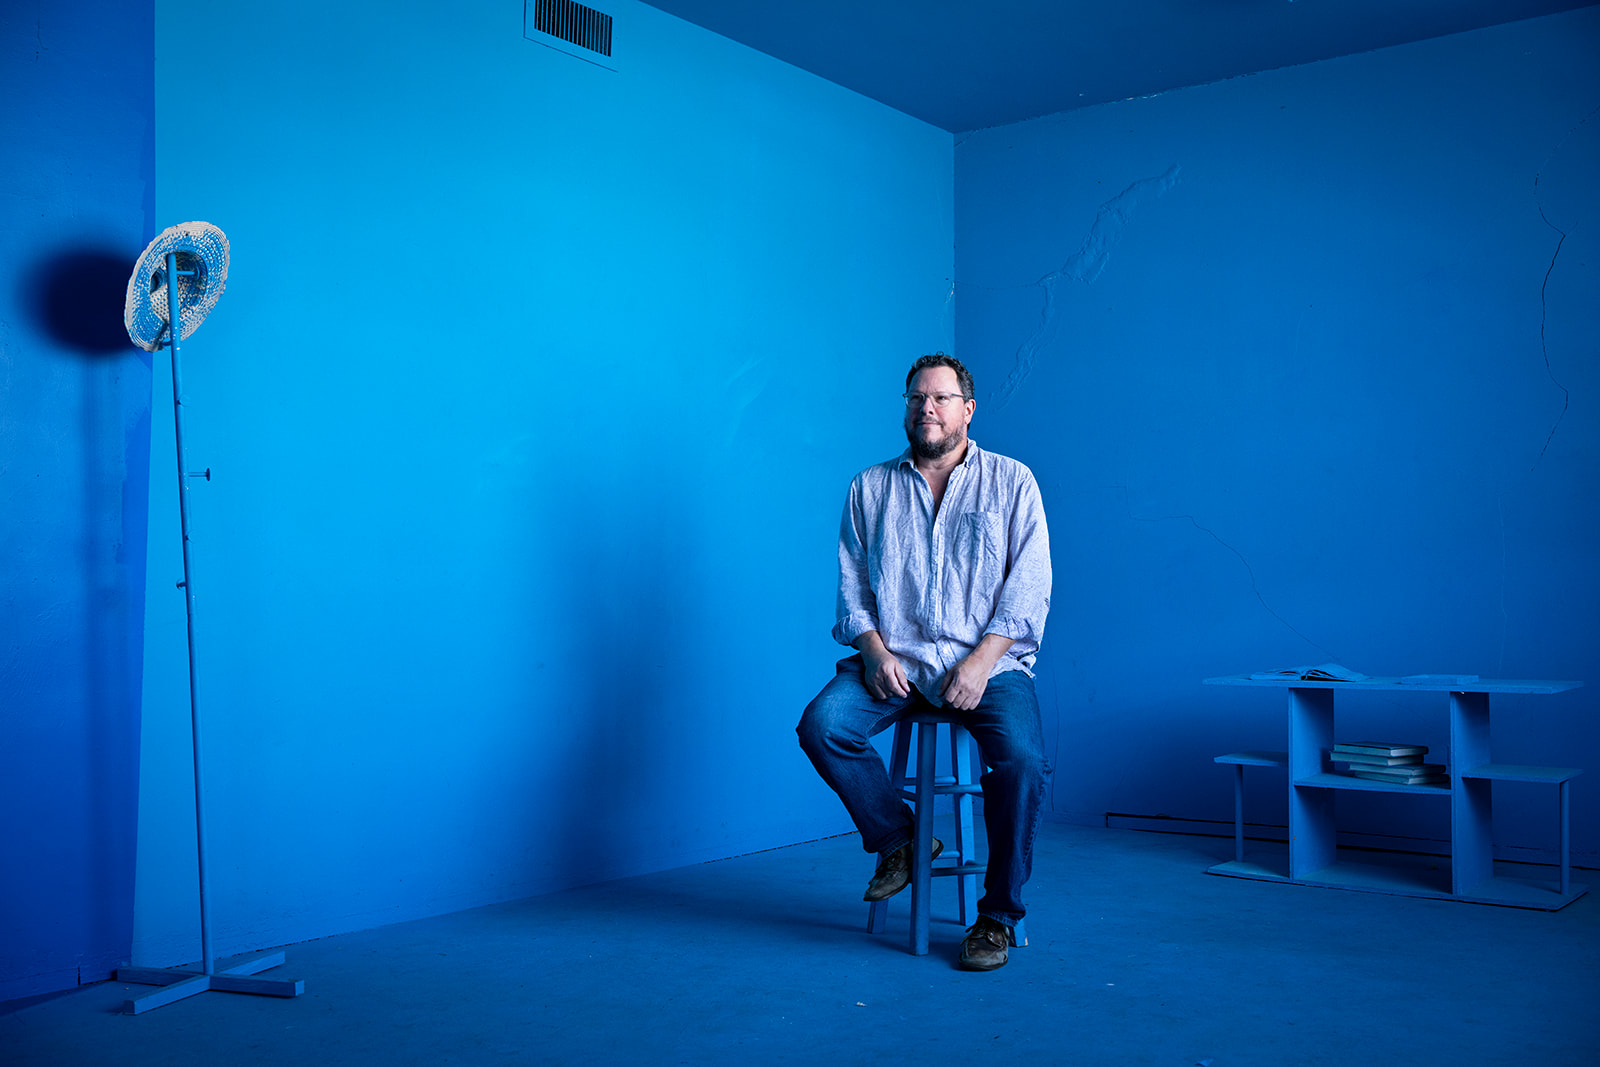 Tim Walter sits on a chair in an entirely blue room